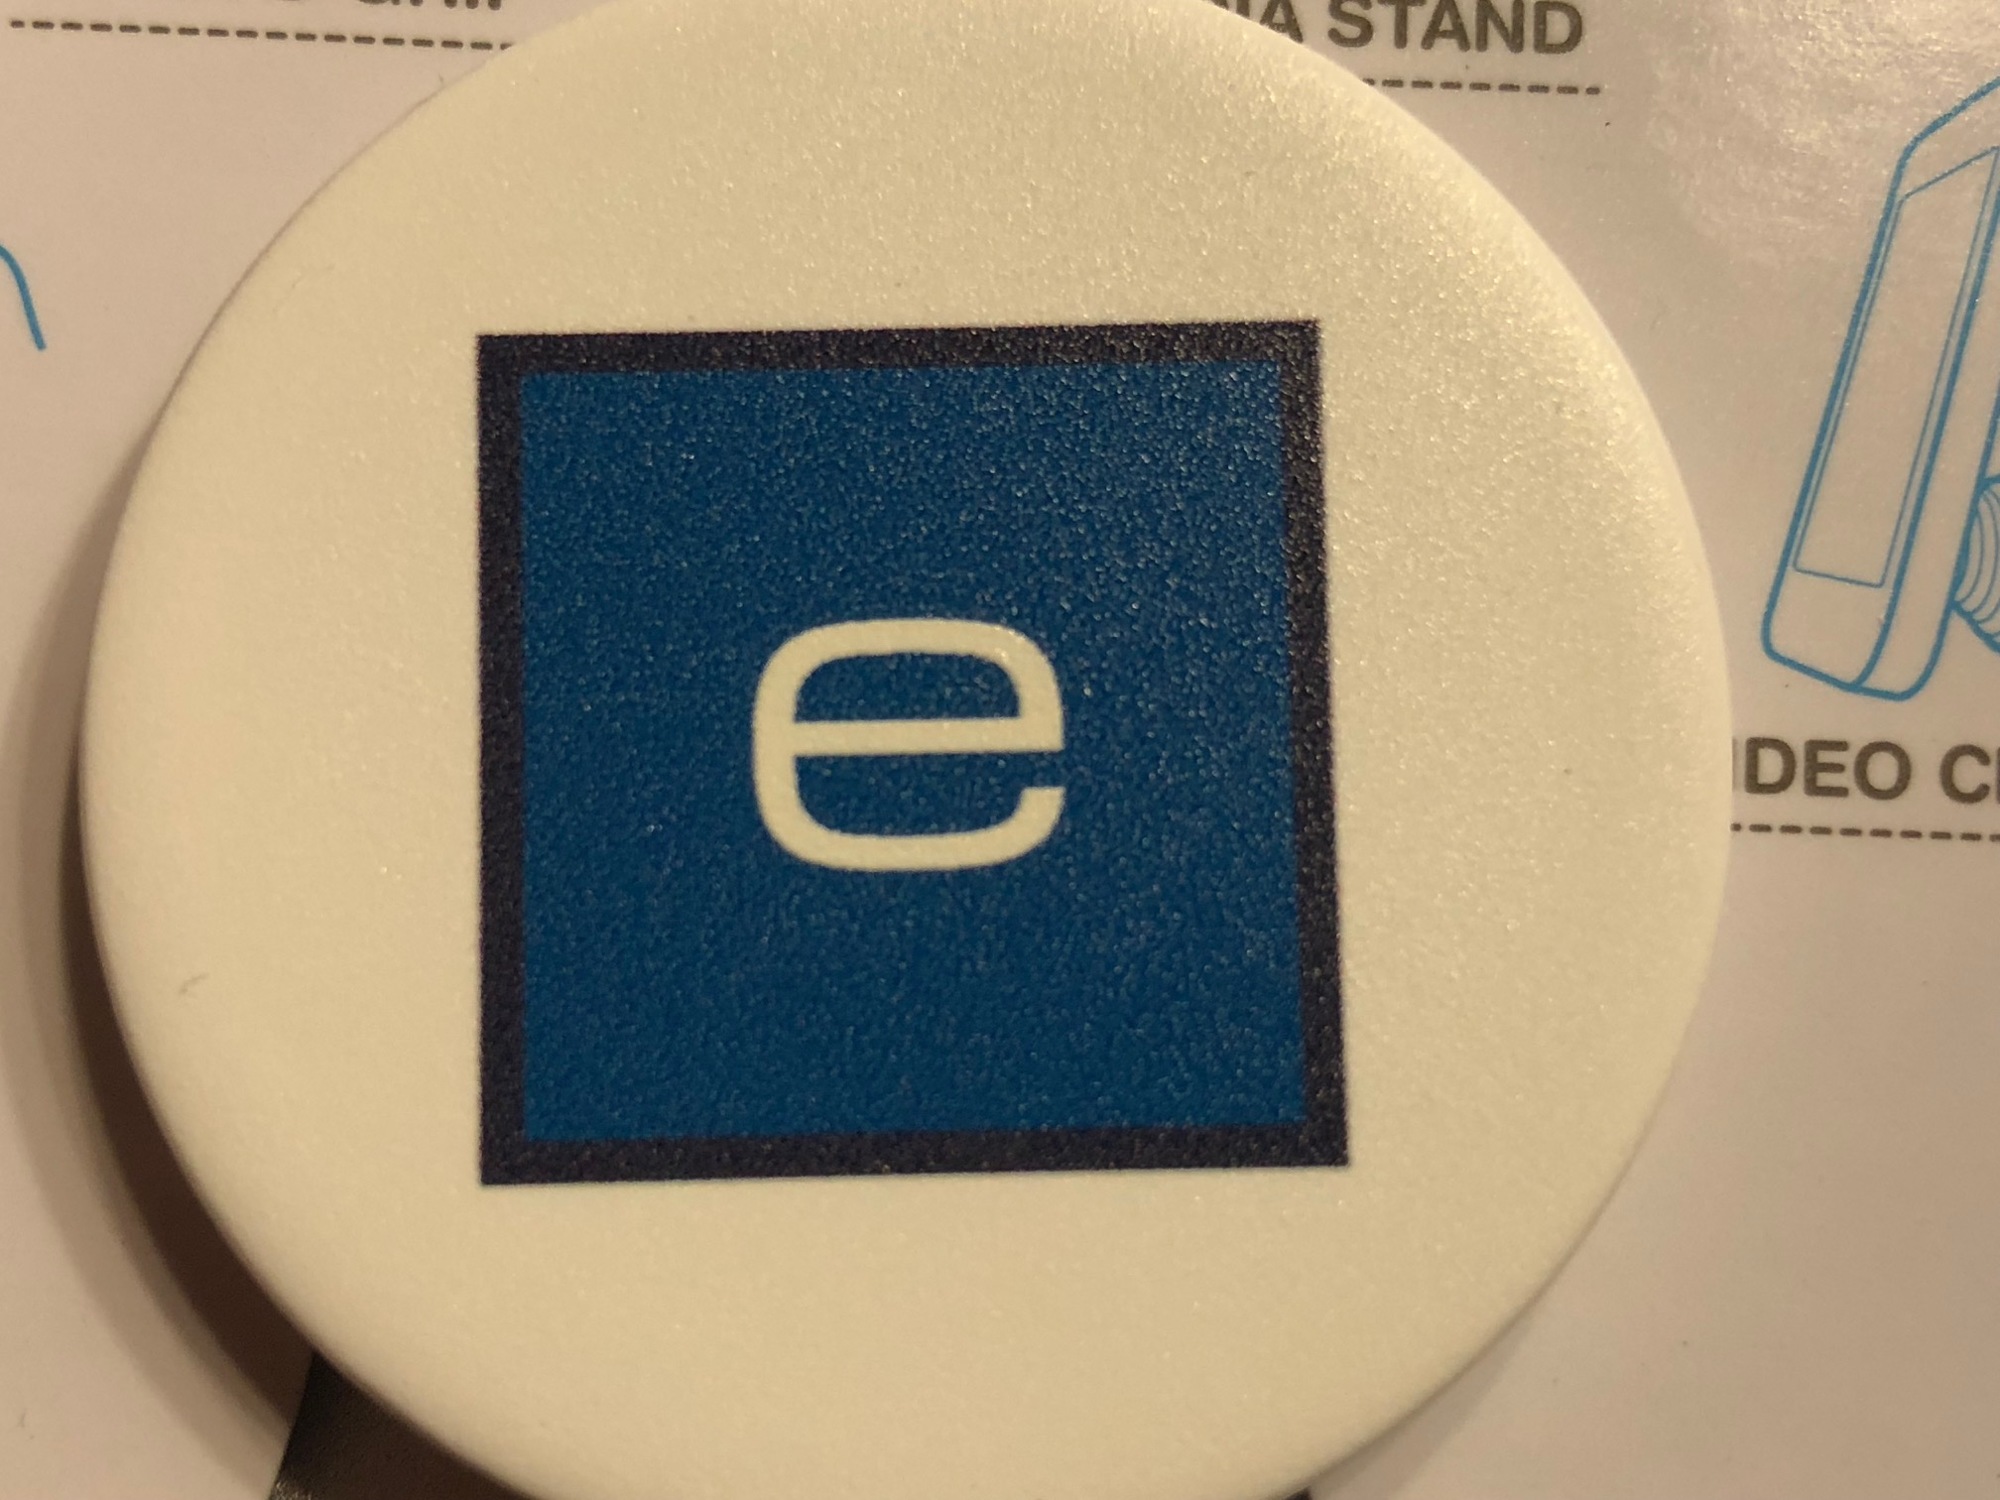 A Popsockets mobile phone accessory features the eTown logo.